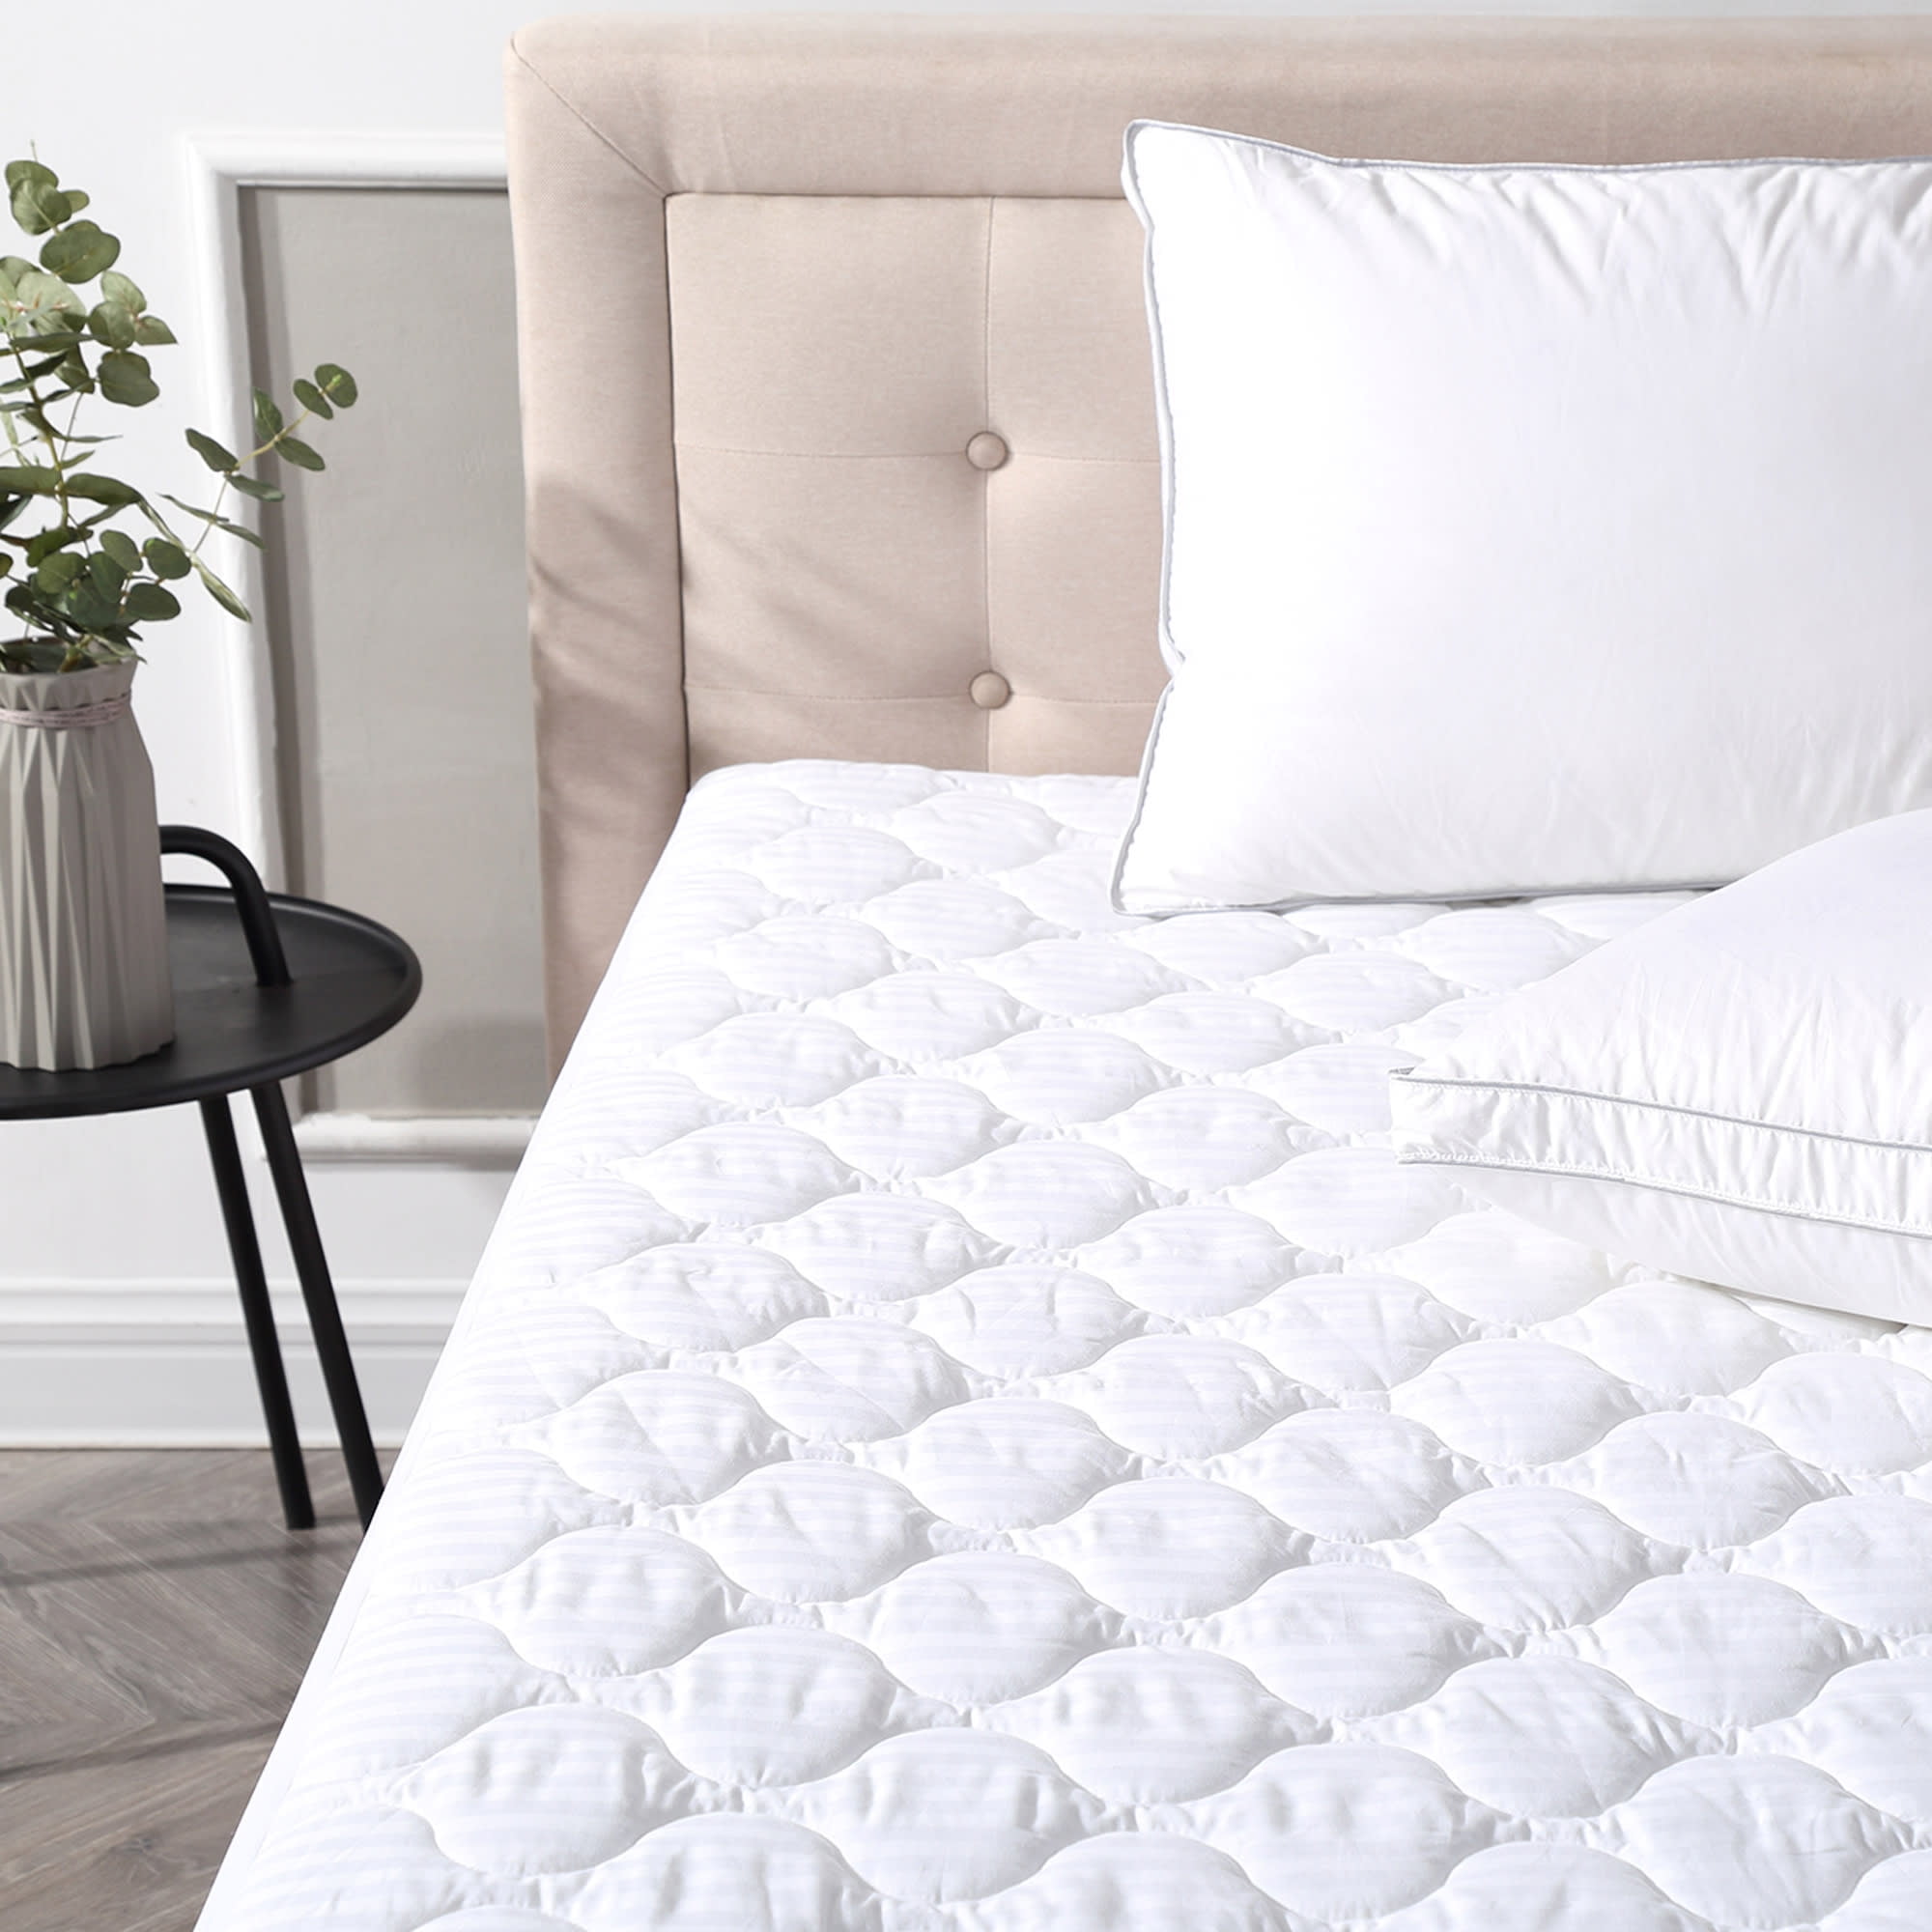 Hotel Quality Supersoft Microfibre Mattress Protector King Size Bed Soft Diamond Quilted /& Anti Allergenic Extra Comfort The Bettersleep Company Brand